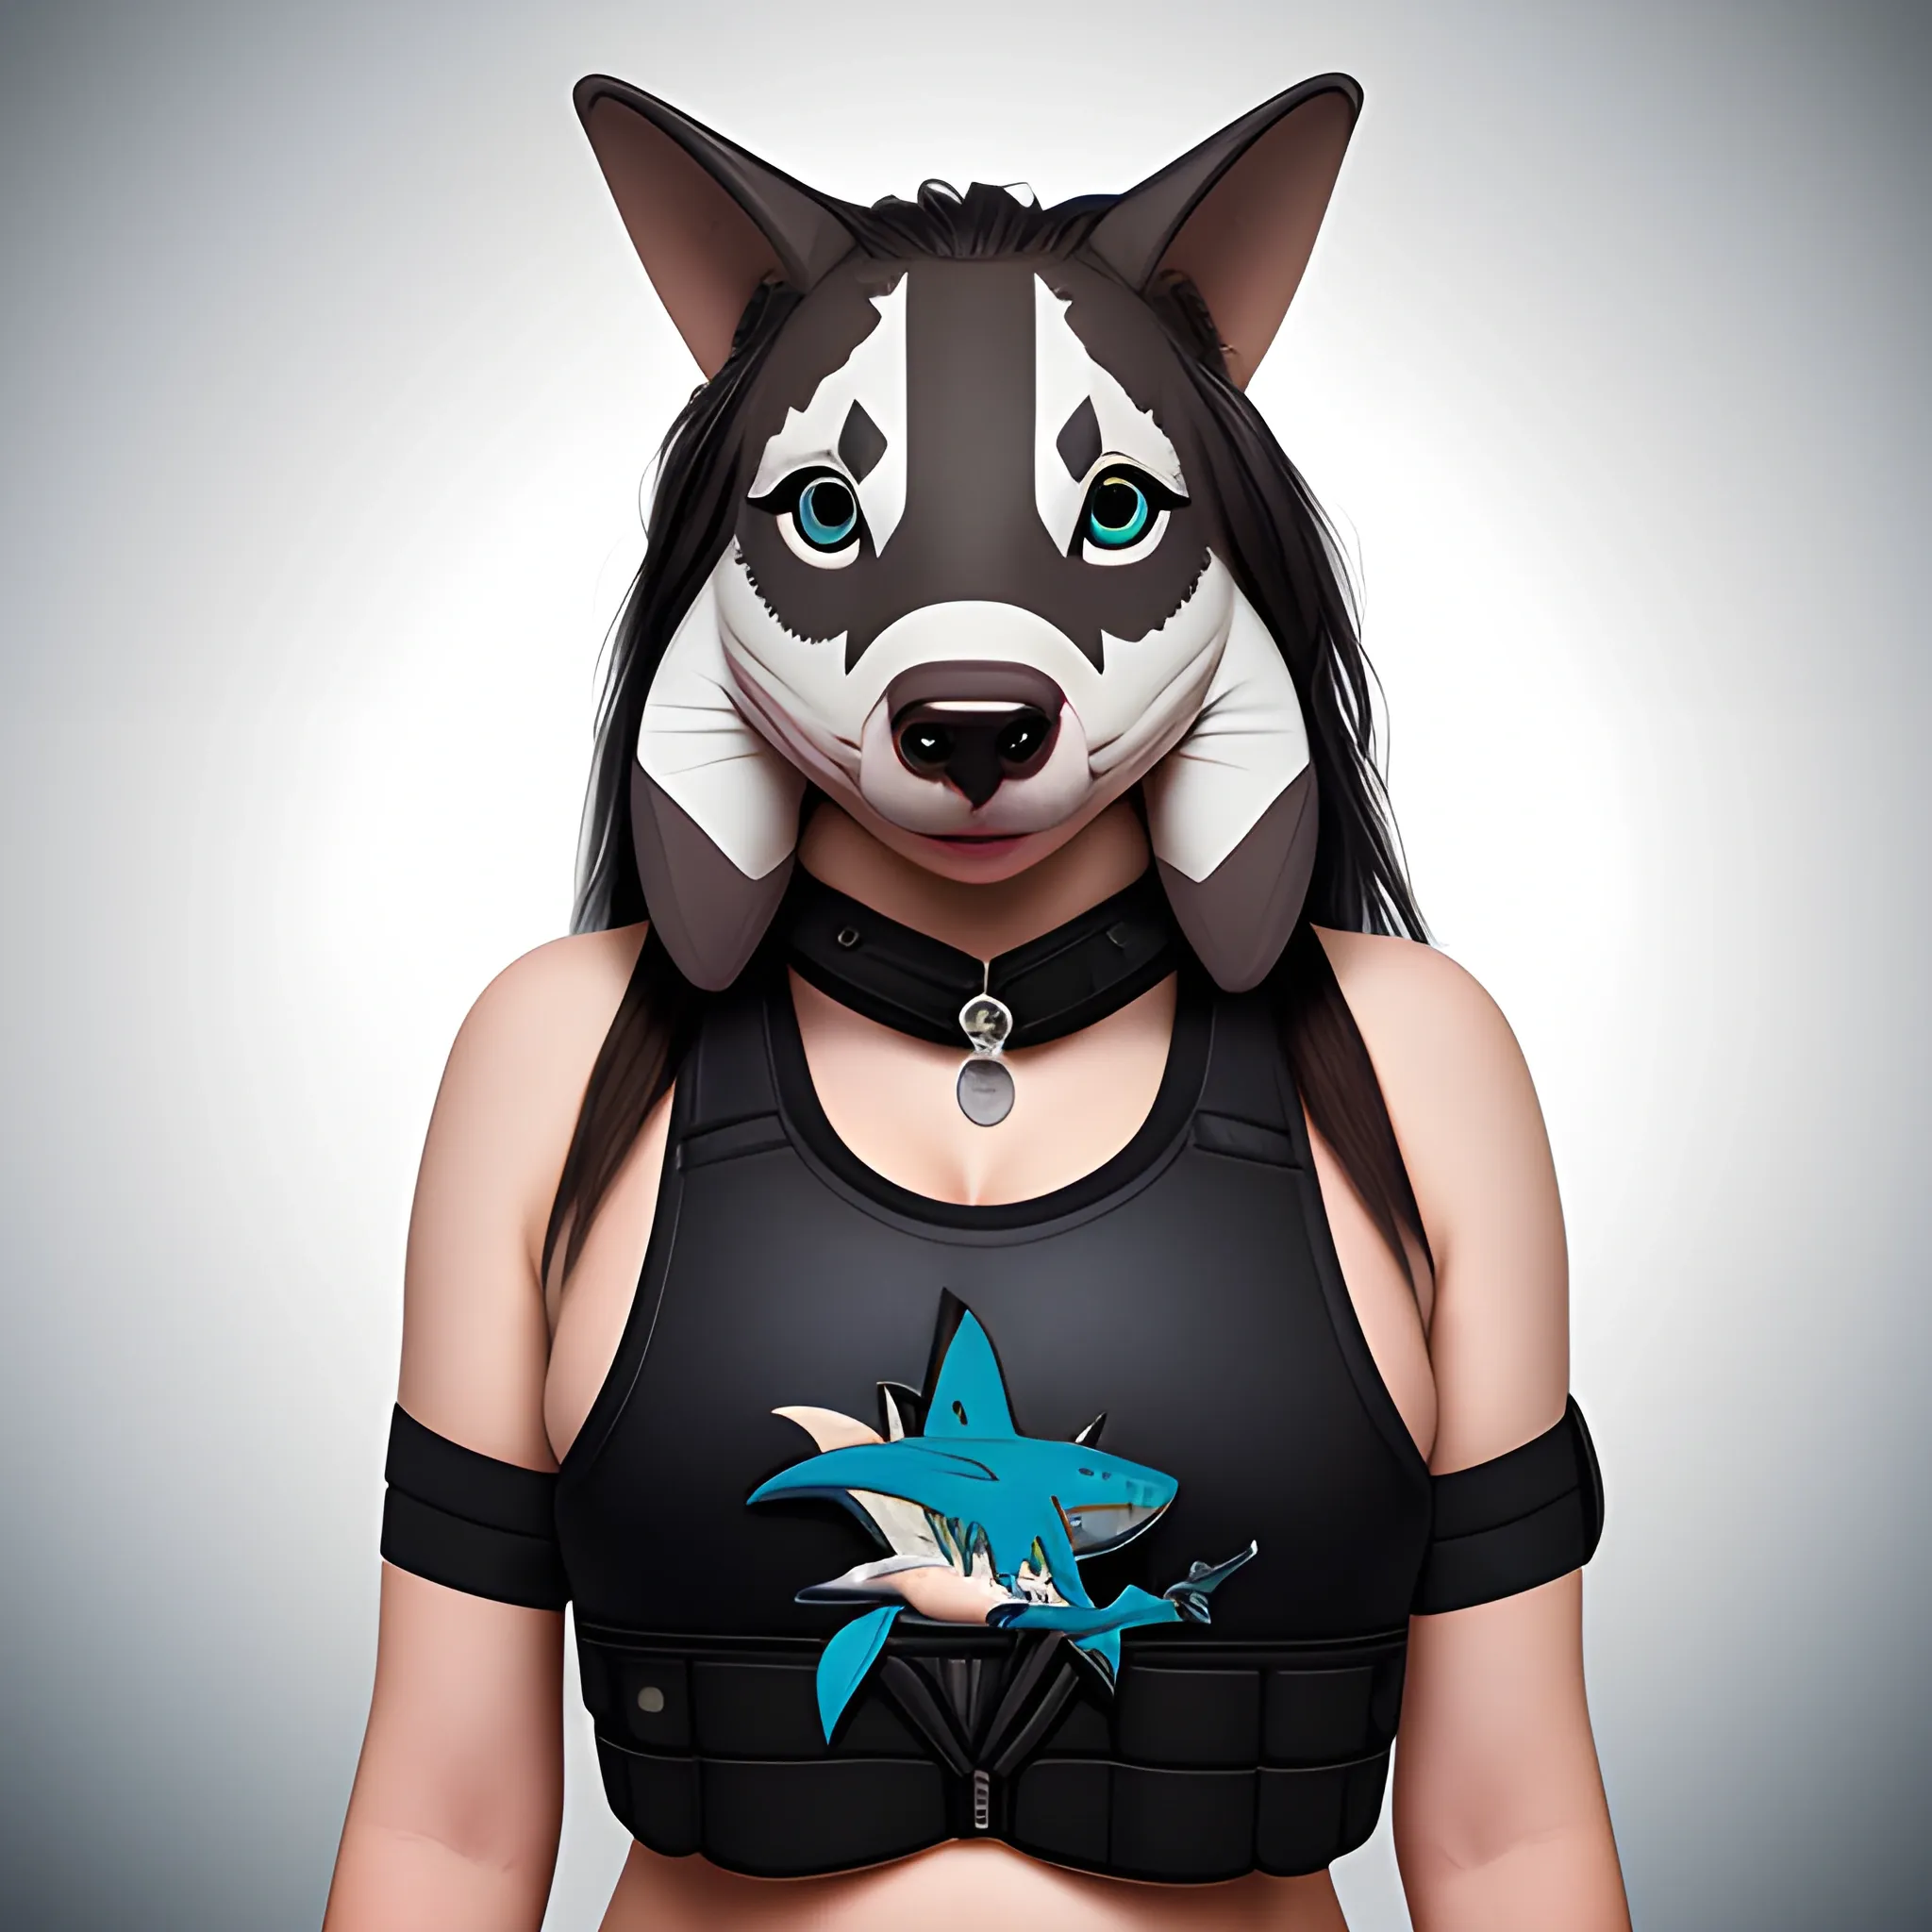 (masterpiece), (portrait photography), (portrait of a female Sharkie fursona), no makeup, flat chested, white sports bra, dogtags, long hair, black hair, blue eyes, full lips, round face, round nose, plump cheeks, black Bulletproof vest